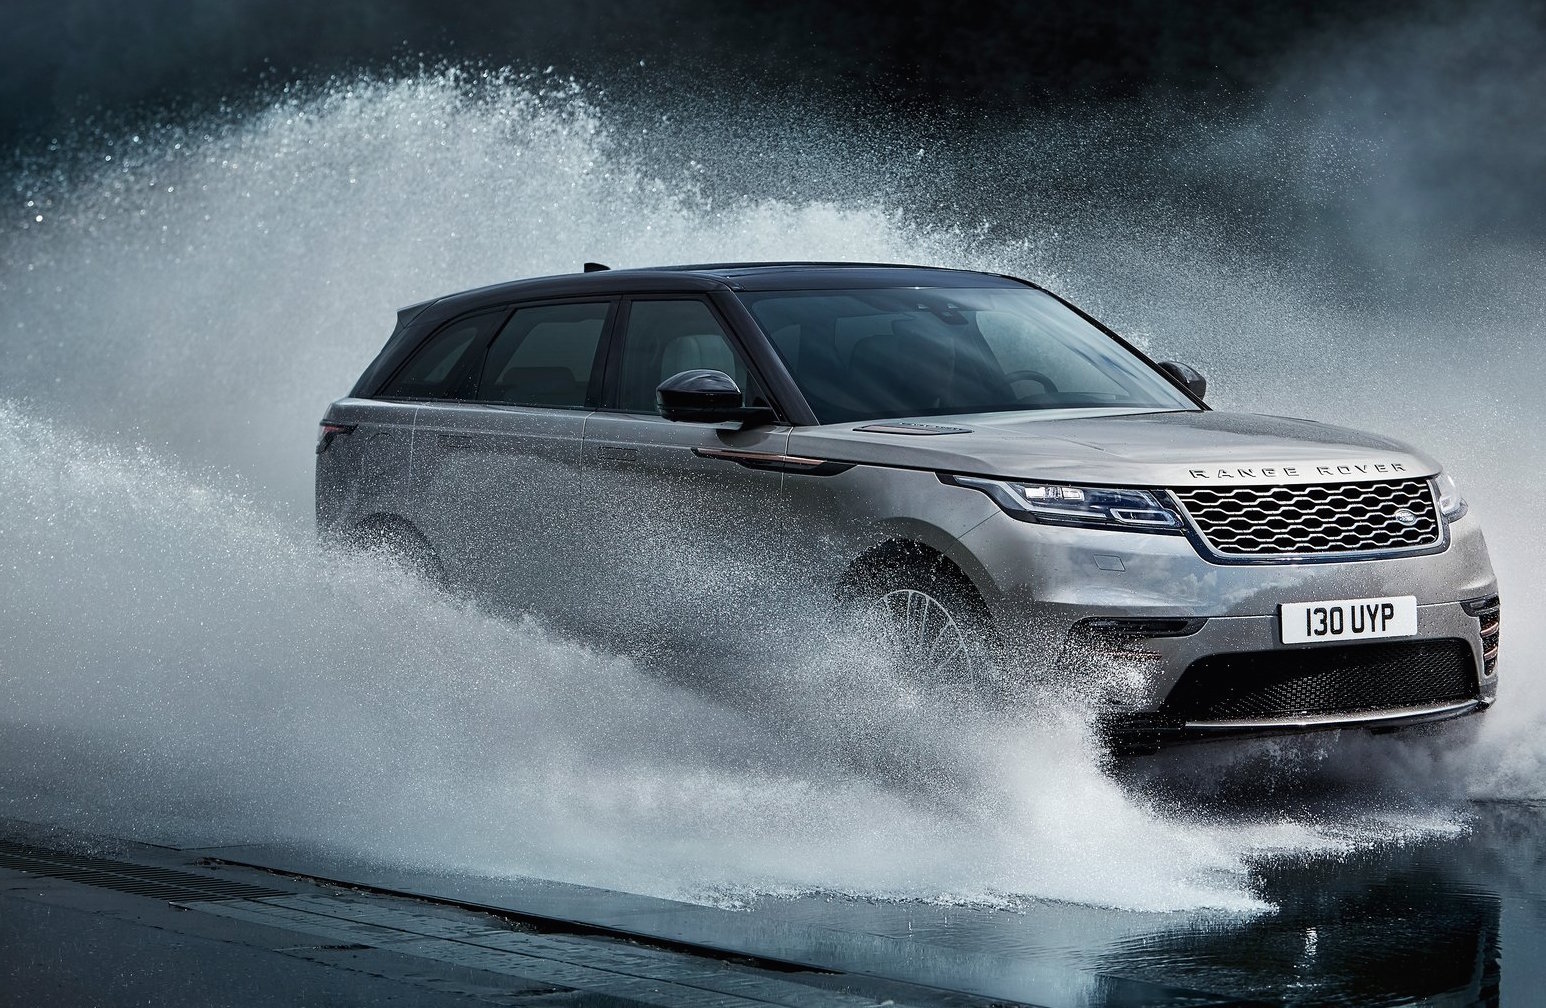 Range Rover Velar unveiled, to go on sale in Australia from $70,300